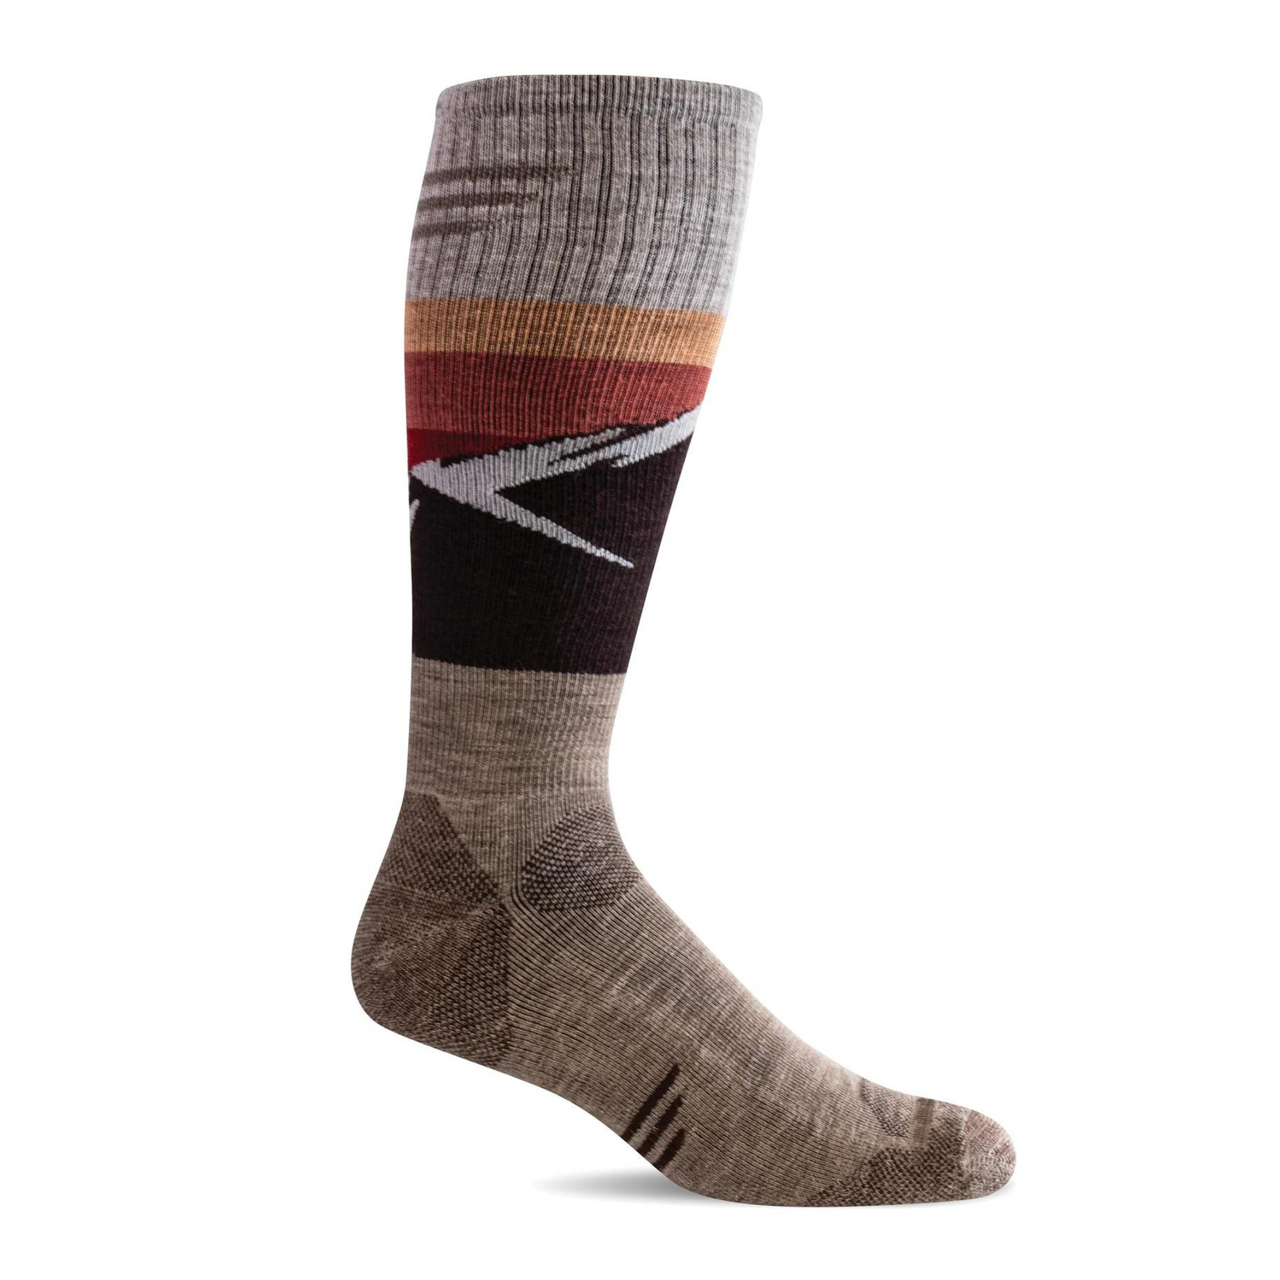 Sockwell Moderate Compression - Modern (Men's)